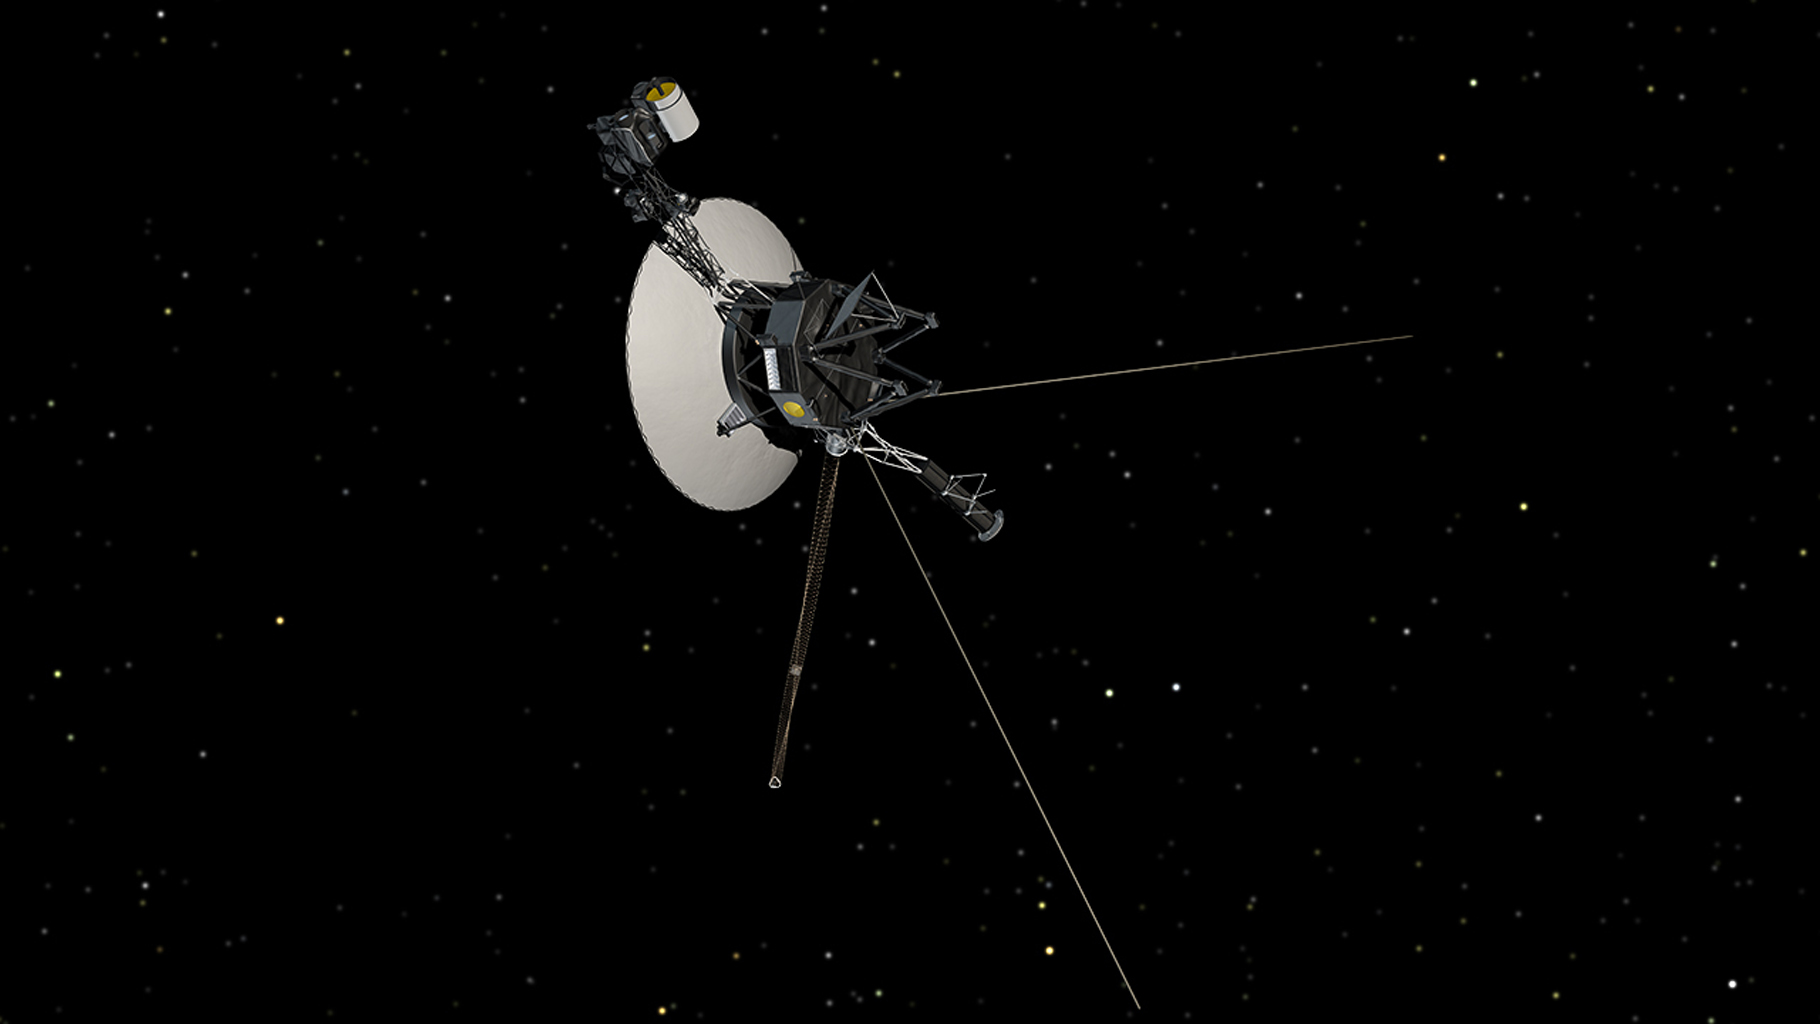 slide 5 - This artist’s concept shows NASA’s Voyager spacecraft against a backdrop of stars.